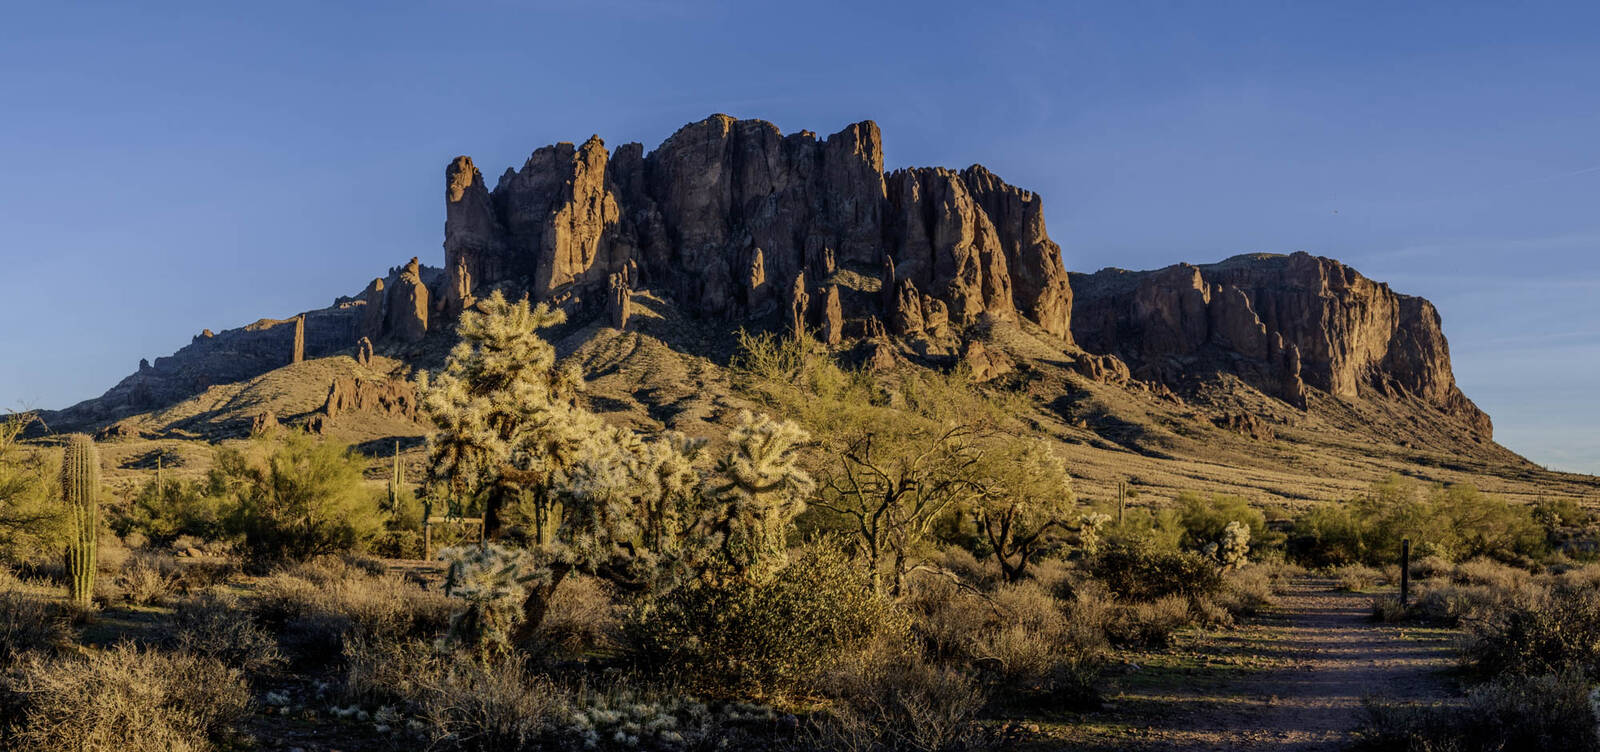 Image of Lost Dutchman State Park by Anita Oakley